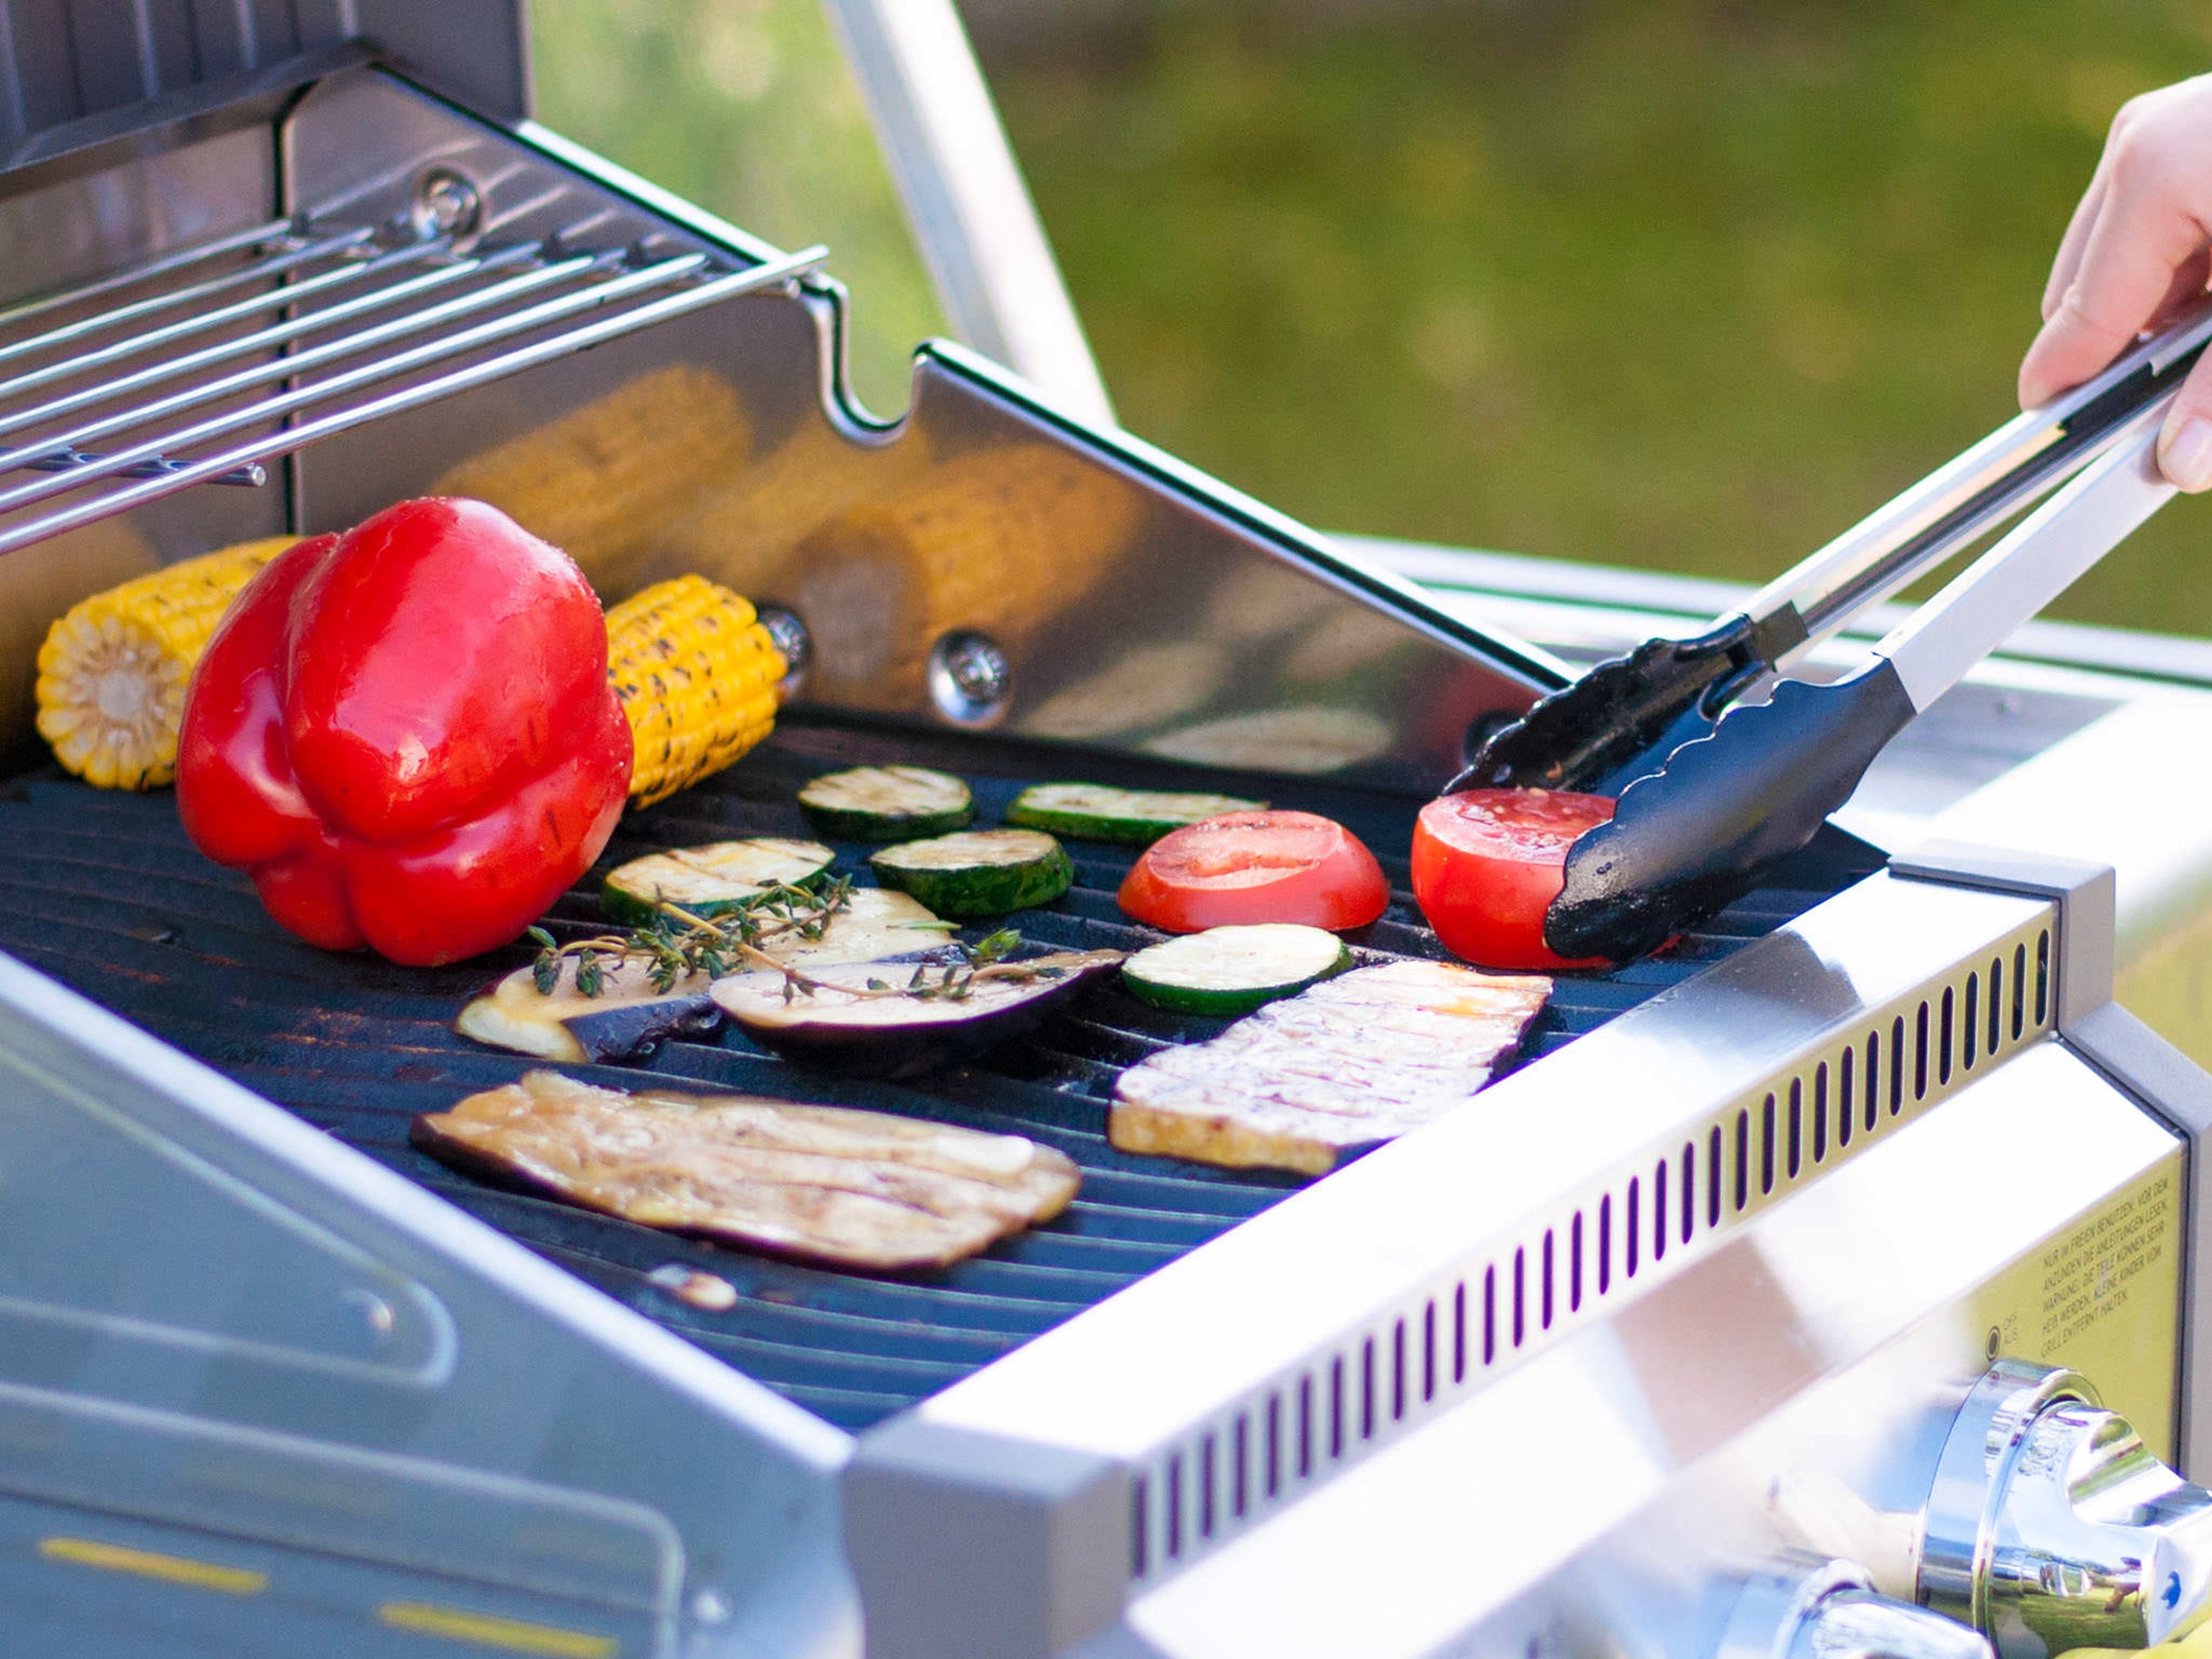 Place vegetables on the hot grill and season again with salt. Grill for approx. 10 – 15 min. turning occasionally. Remove corn, eggplant, zucchini and tomato from direct heat and finish cooking for another 2 – 5 min. Serve with some butter and yogurt dips to taste.